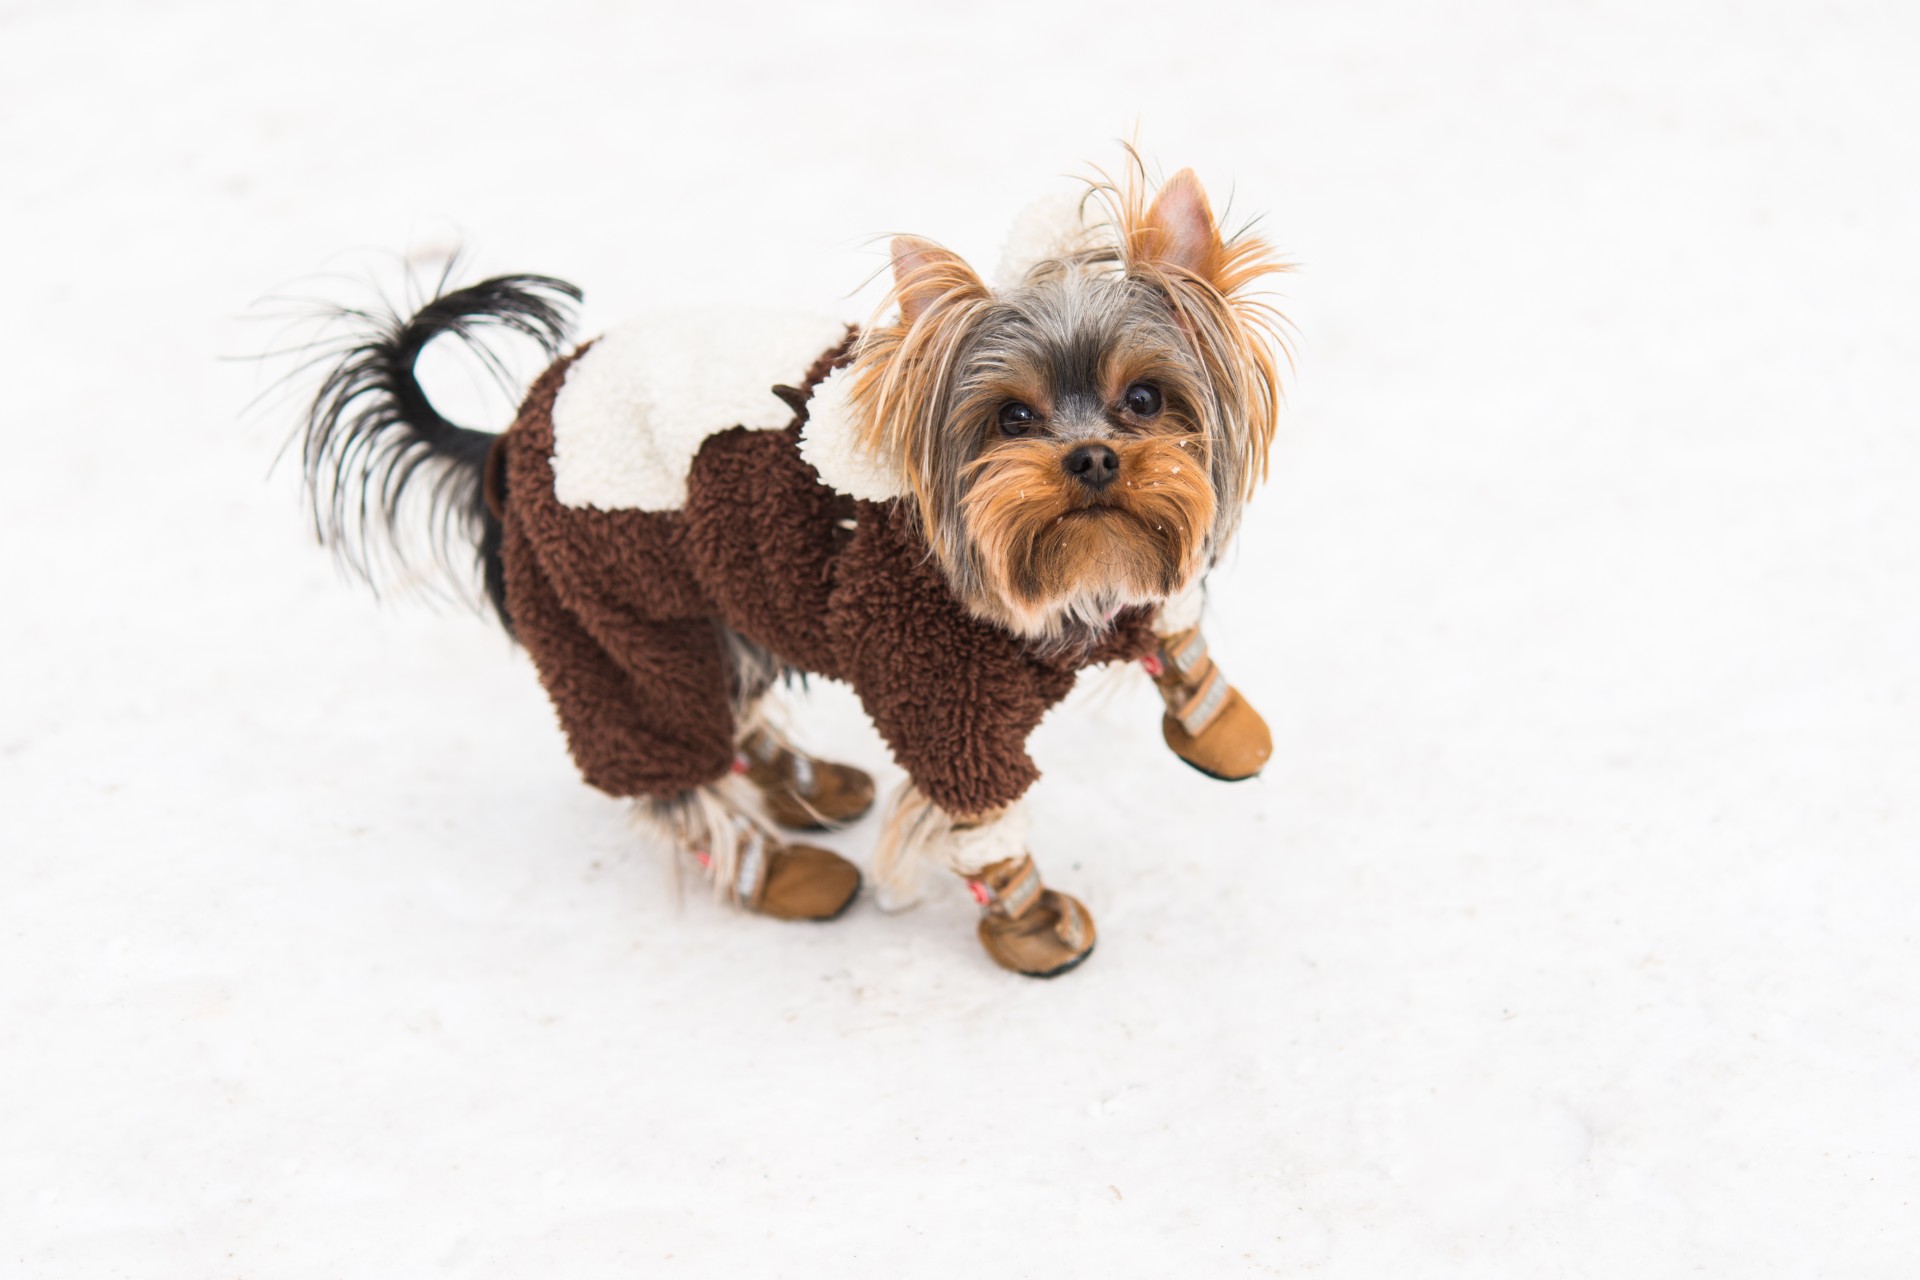 Yorkshire terrier wearing shoes for the snow